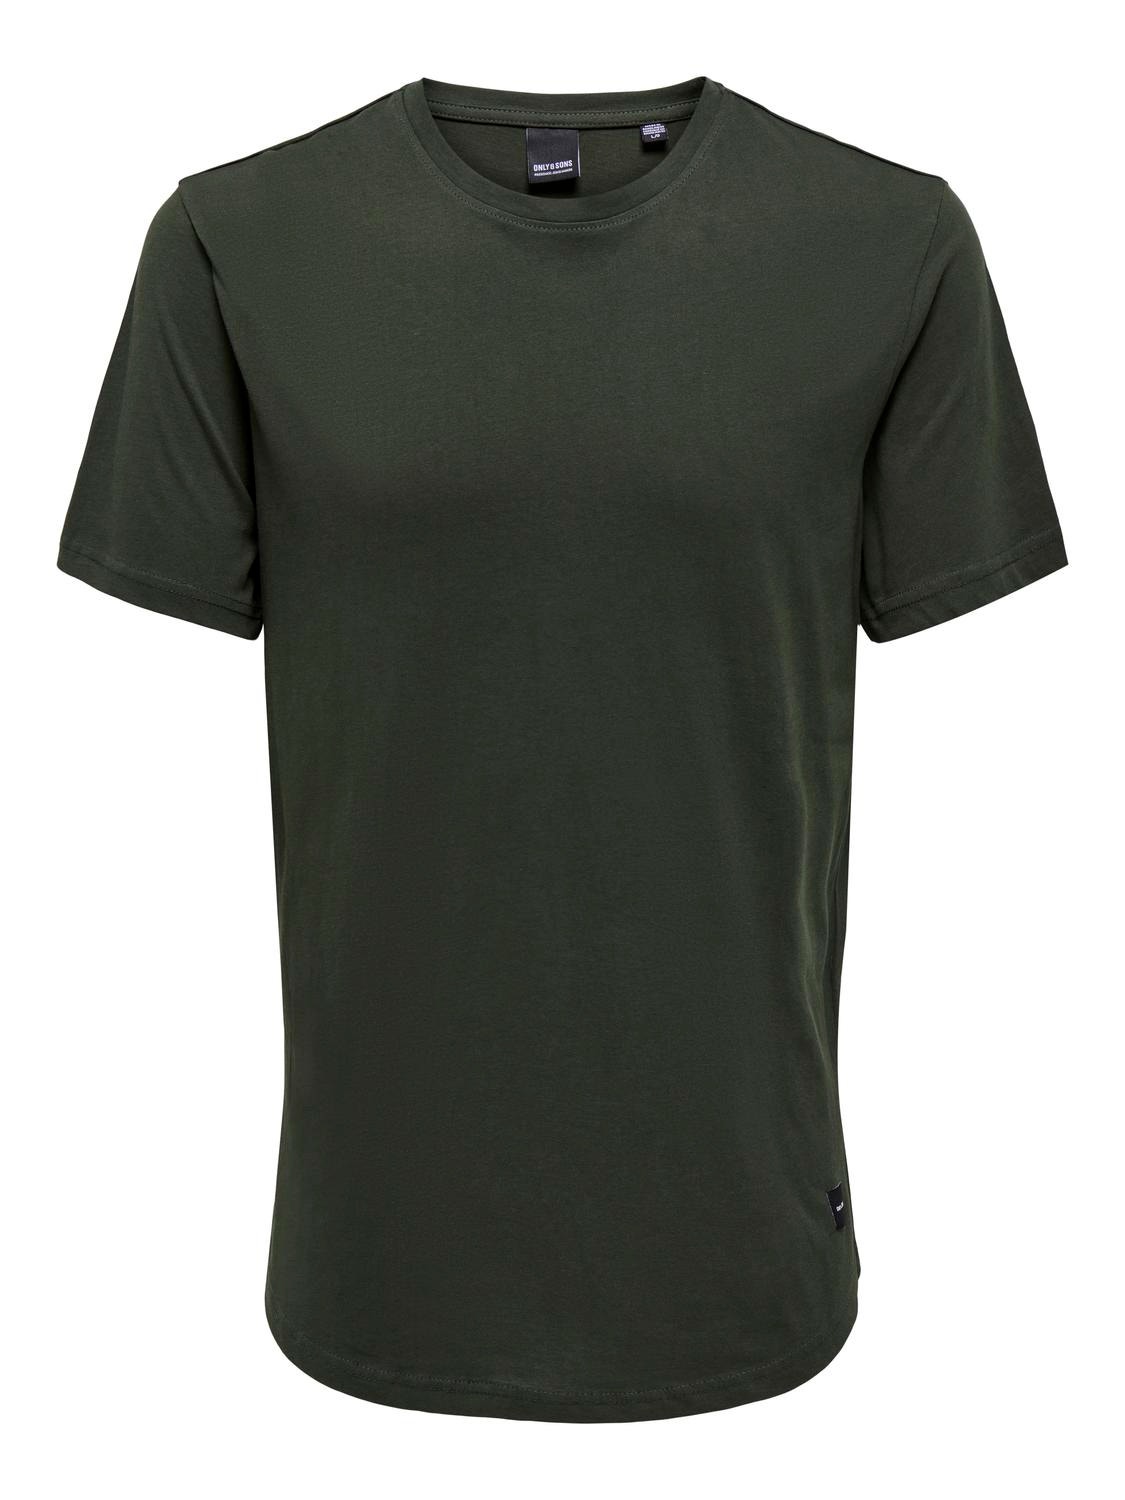 ONLY & SONS Long Line Fit Round Neck T-Shirt -Rosin - 22002973